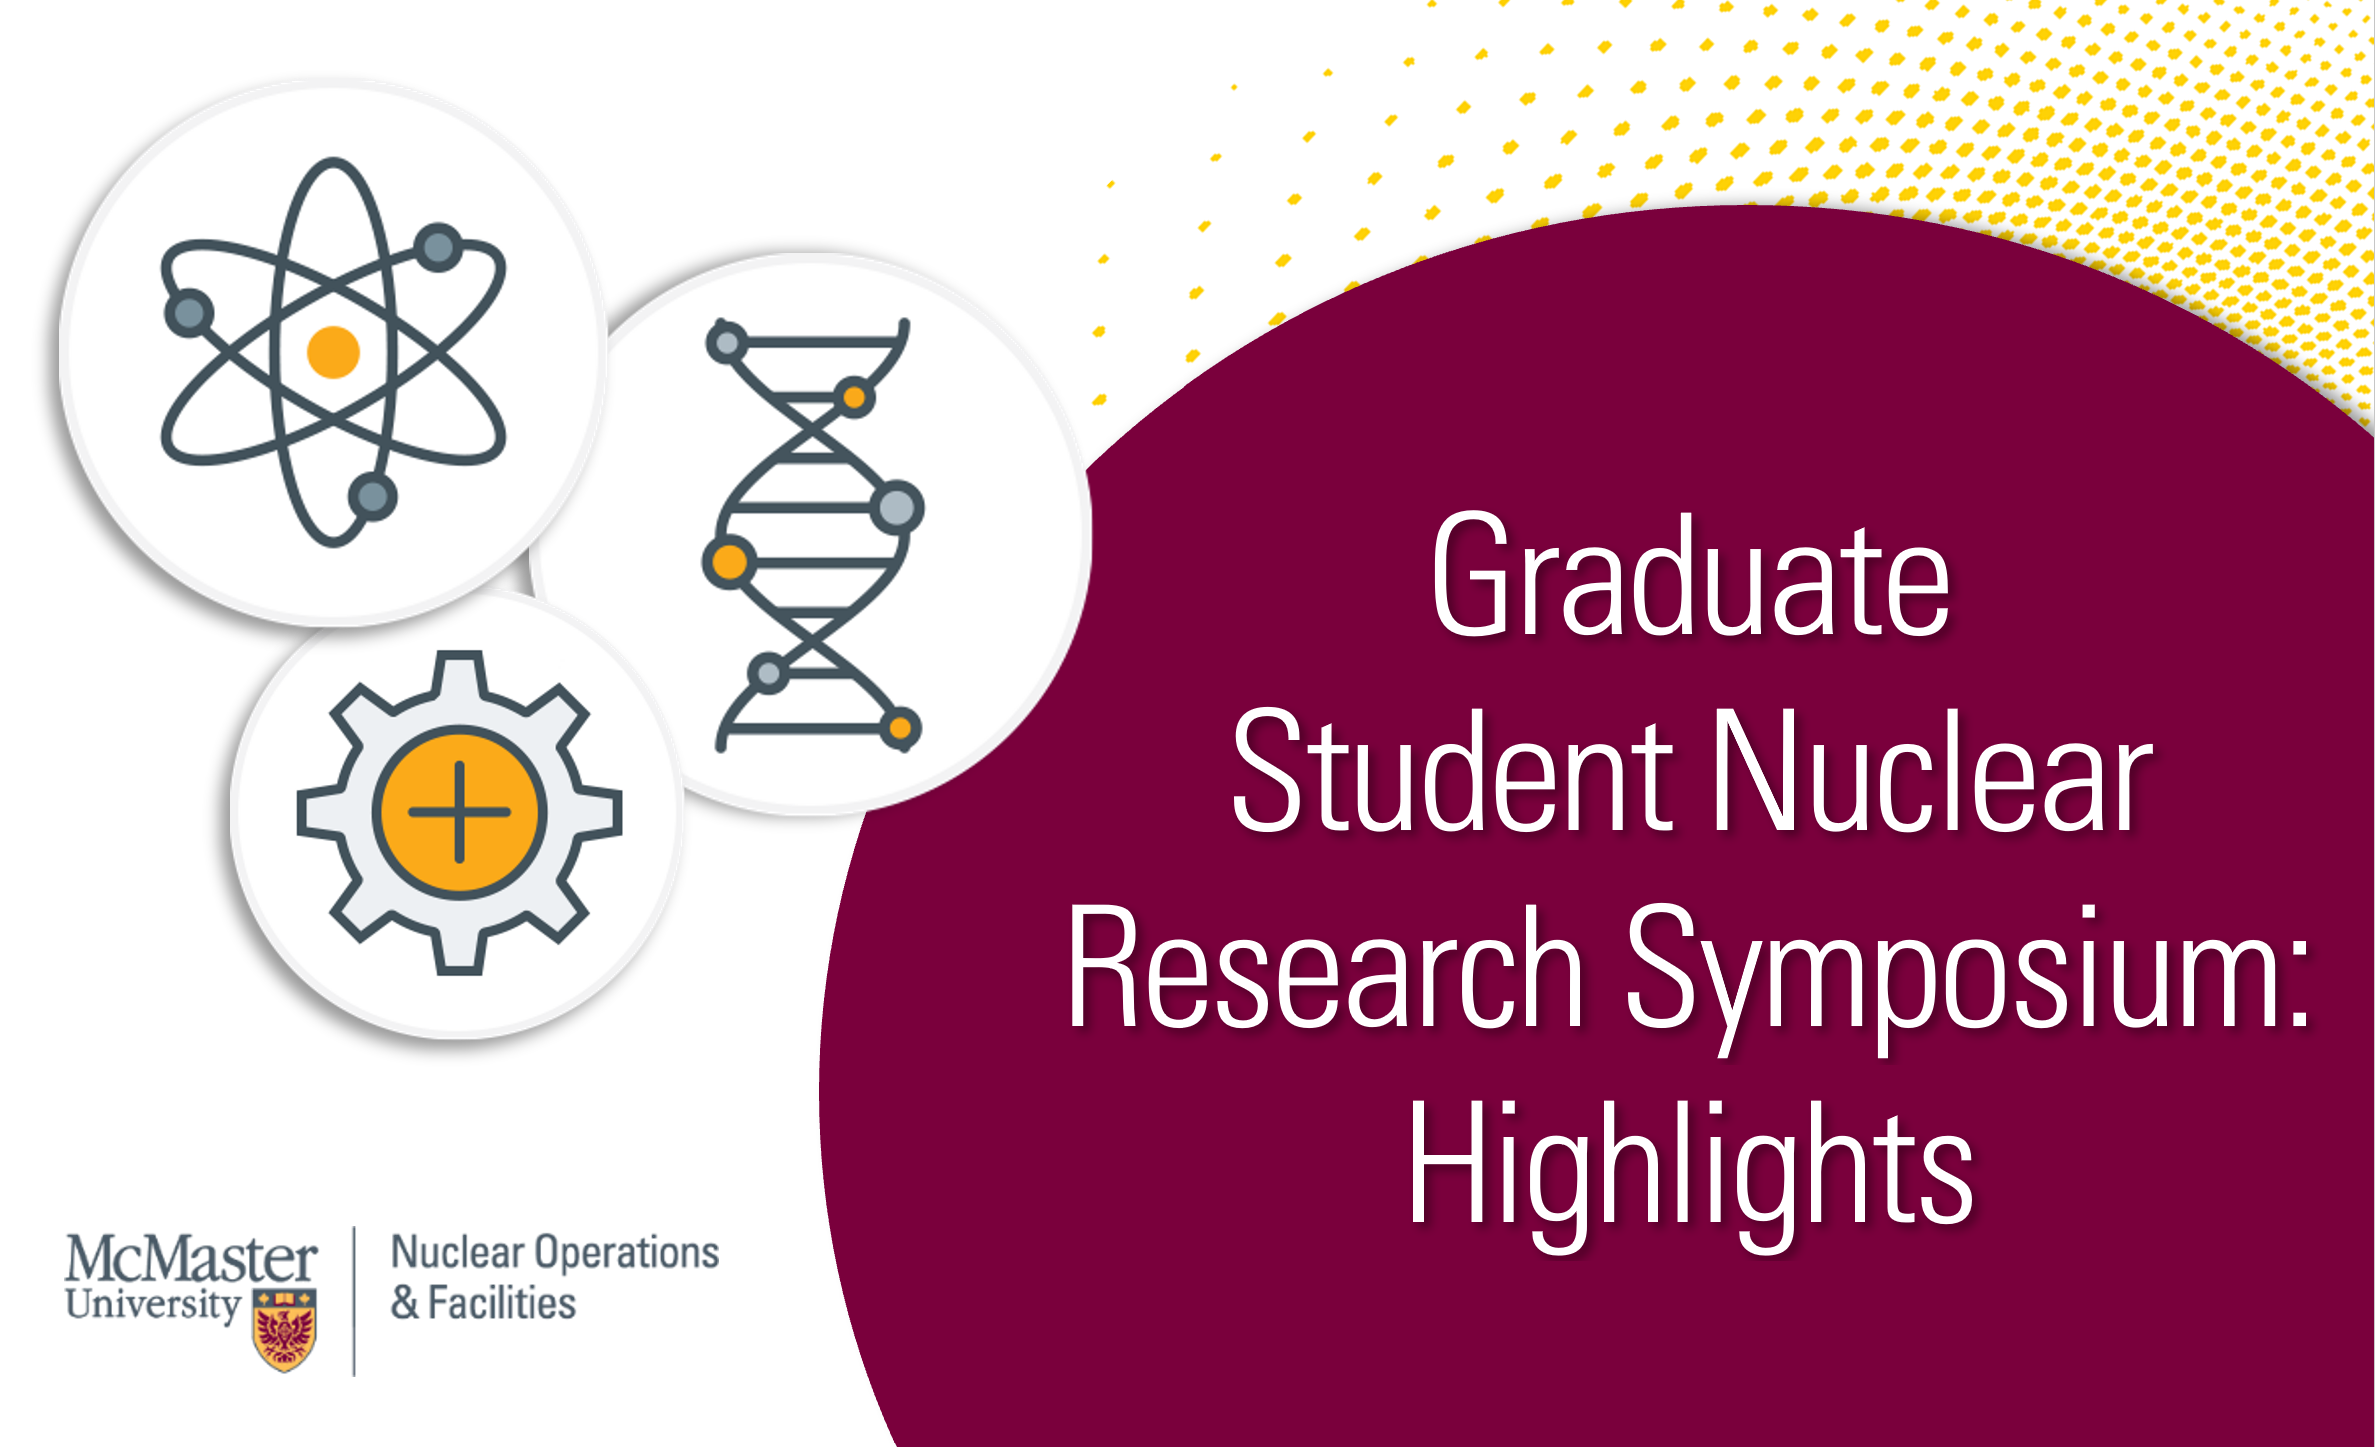 Graduate Student Nuclear Research Symposium Highlights.